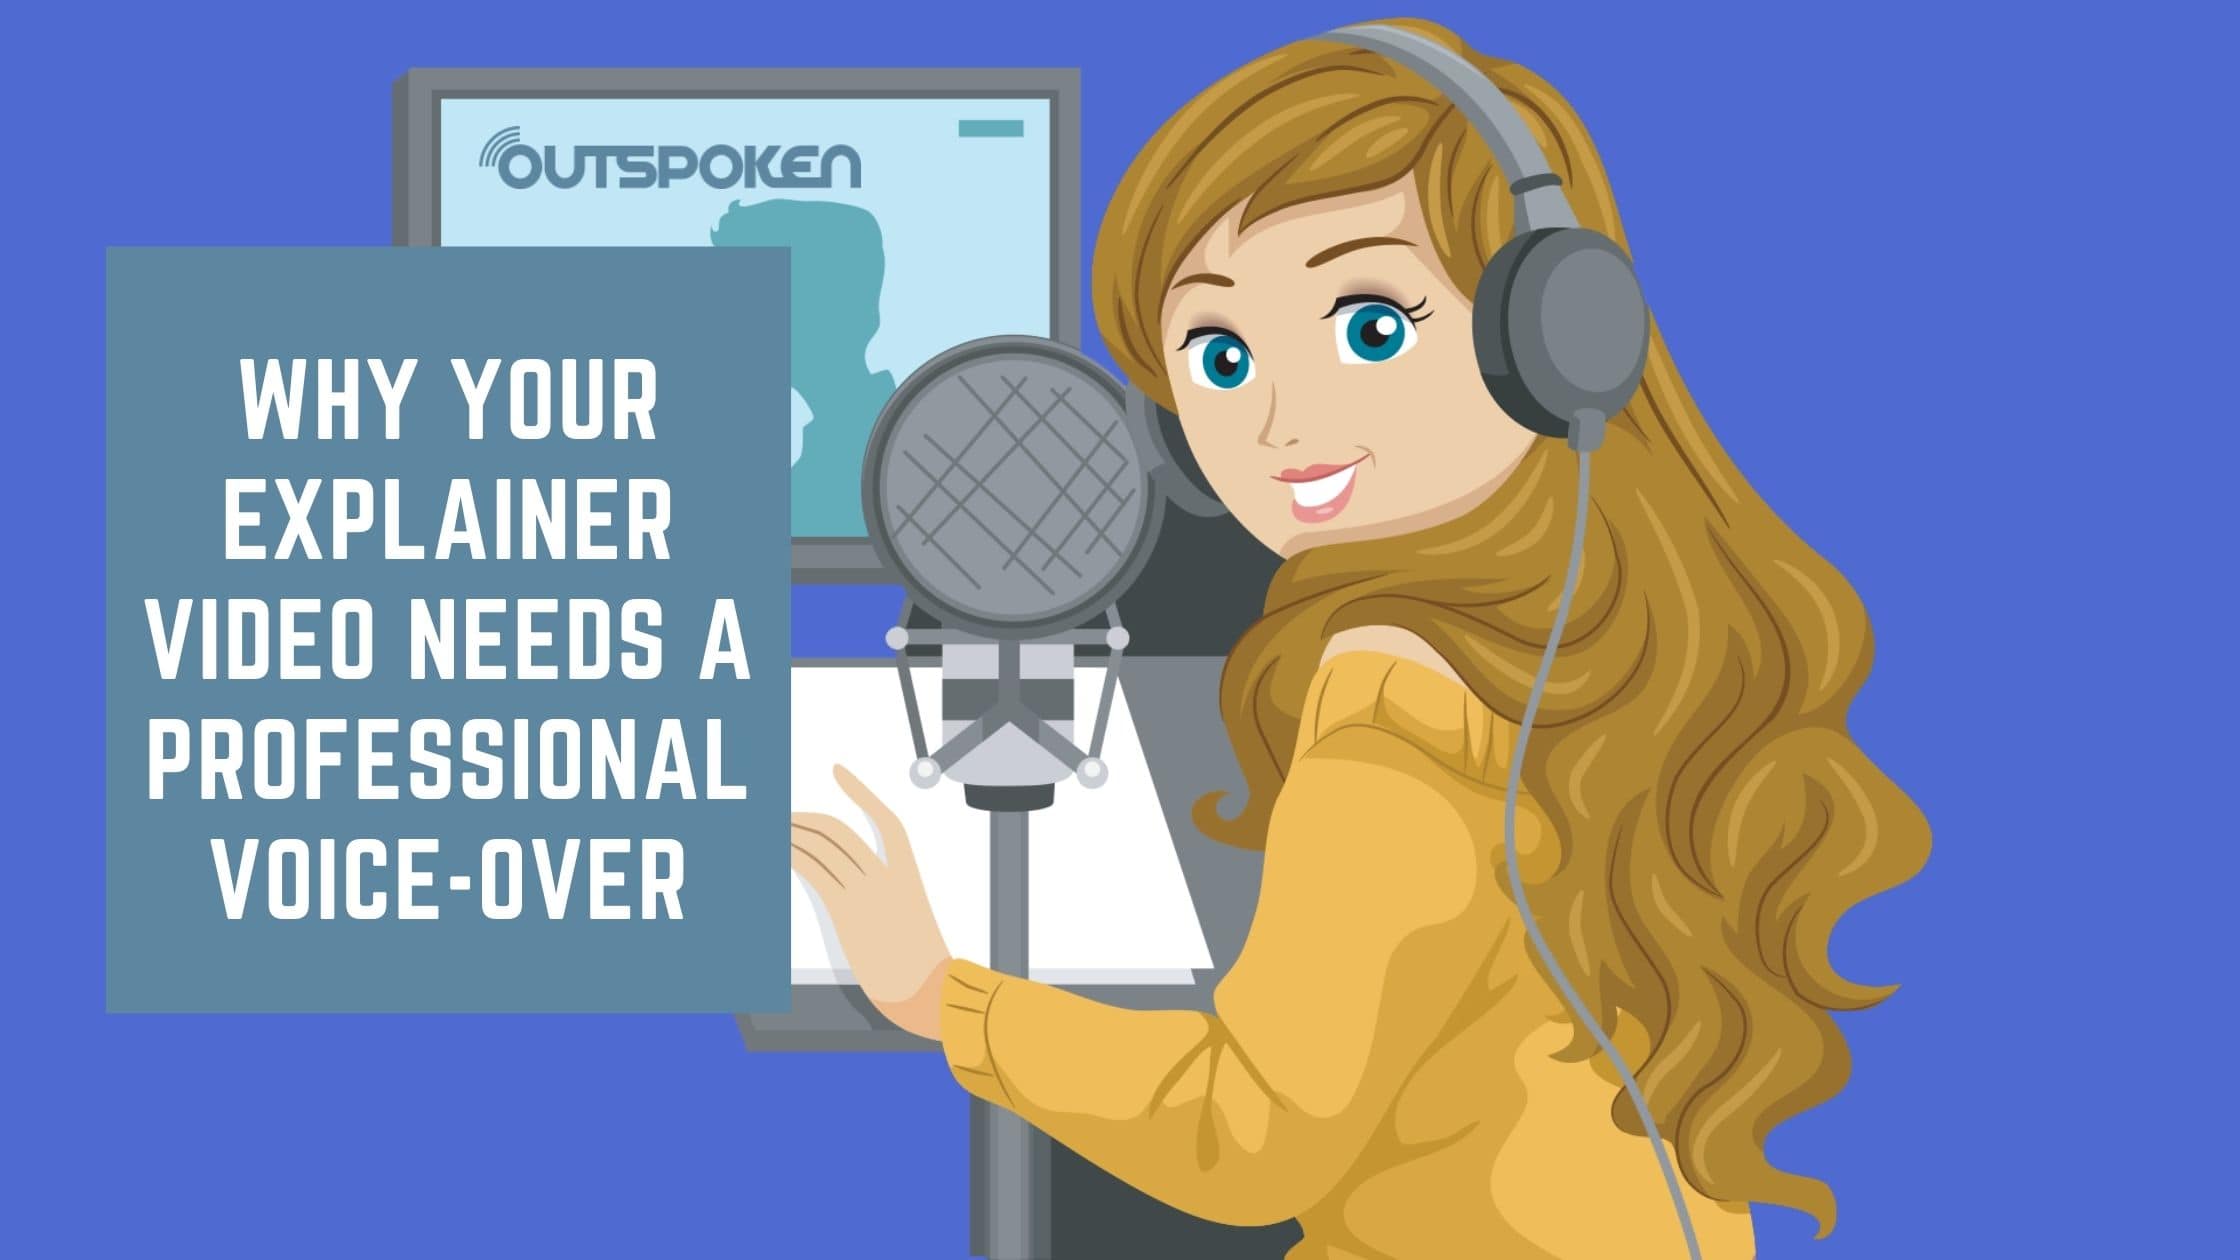 Why Your Explainer Video Needs a Professional Voice-over